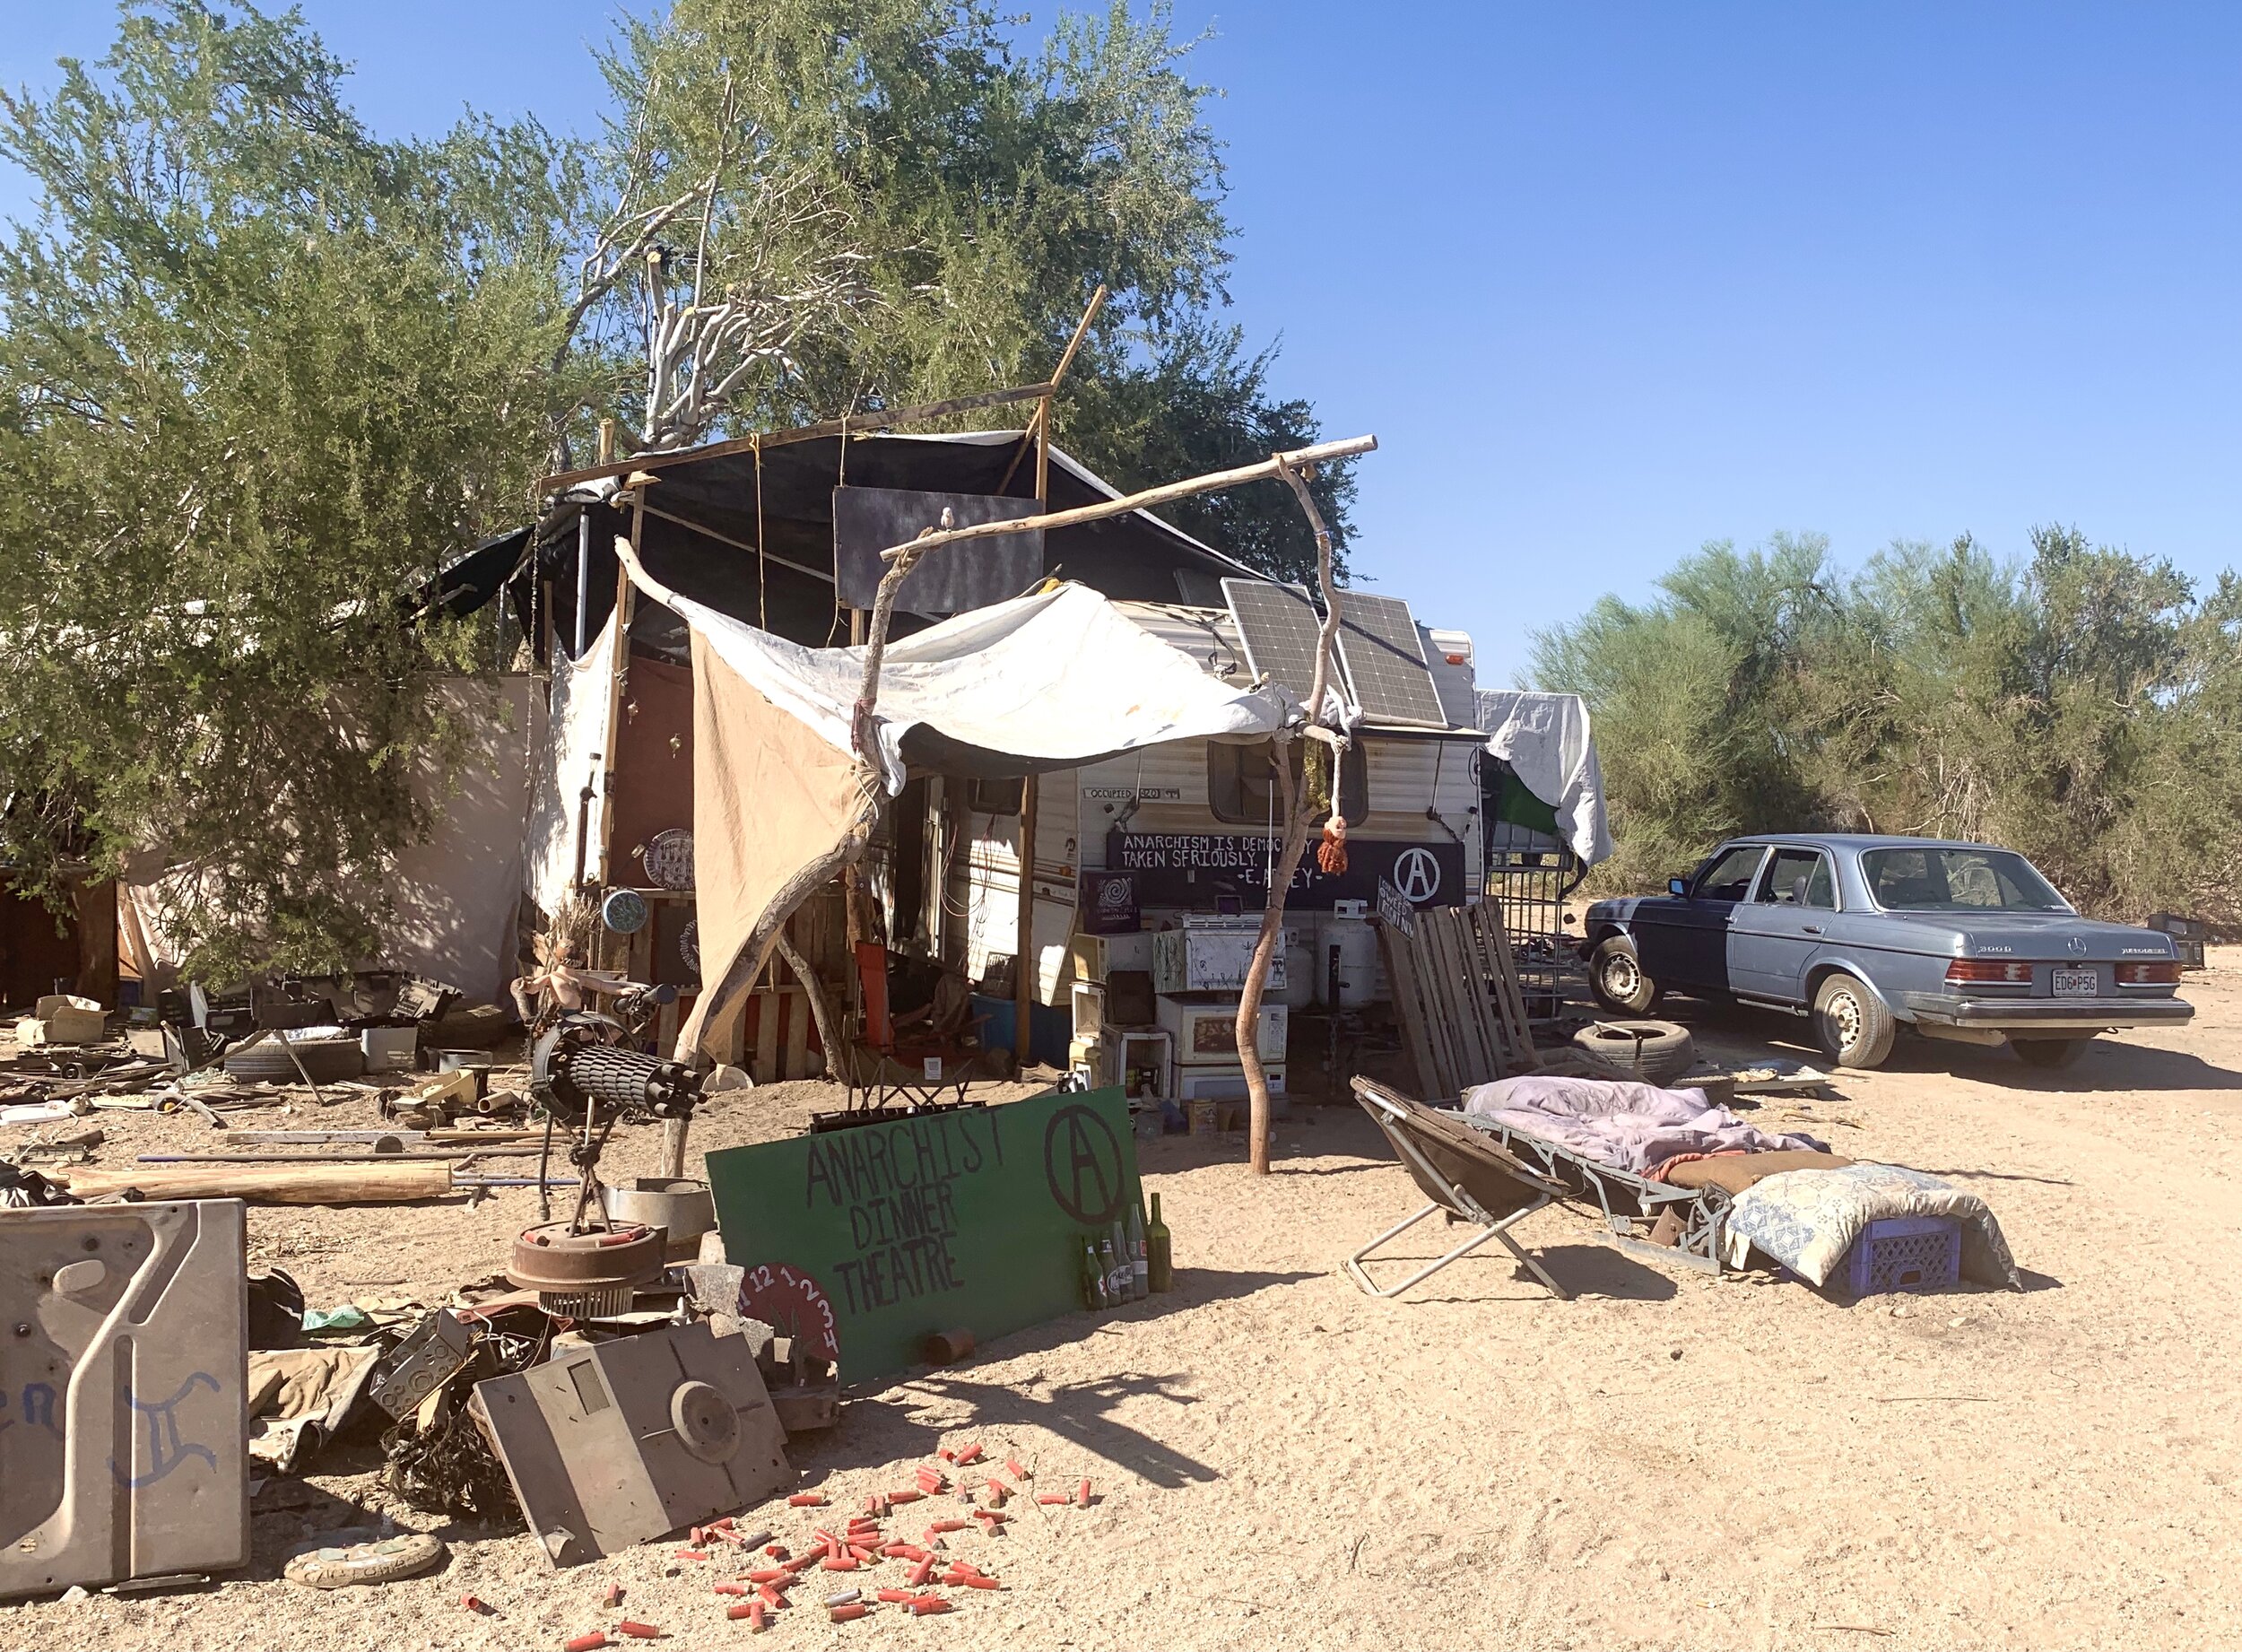  Wikipedia describes  Slab City    as  an off-the-grid squatter community known for attracting people who want to live outside mainstream society.  There is much to say to explain this bizarre community, and at the same time, there are no words. The 